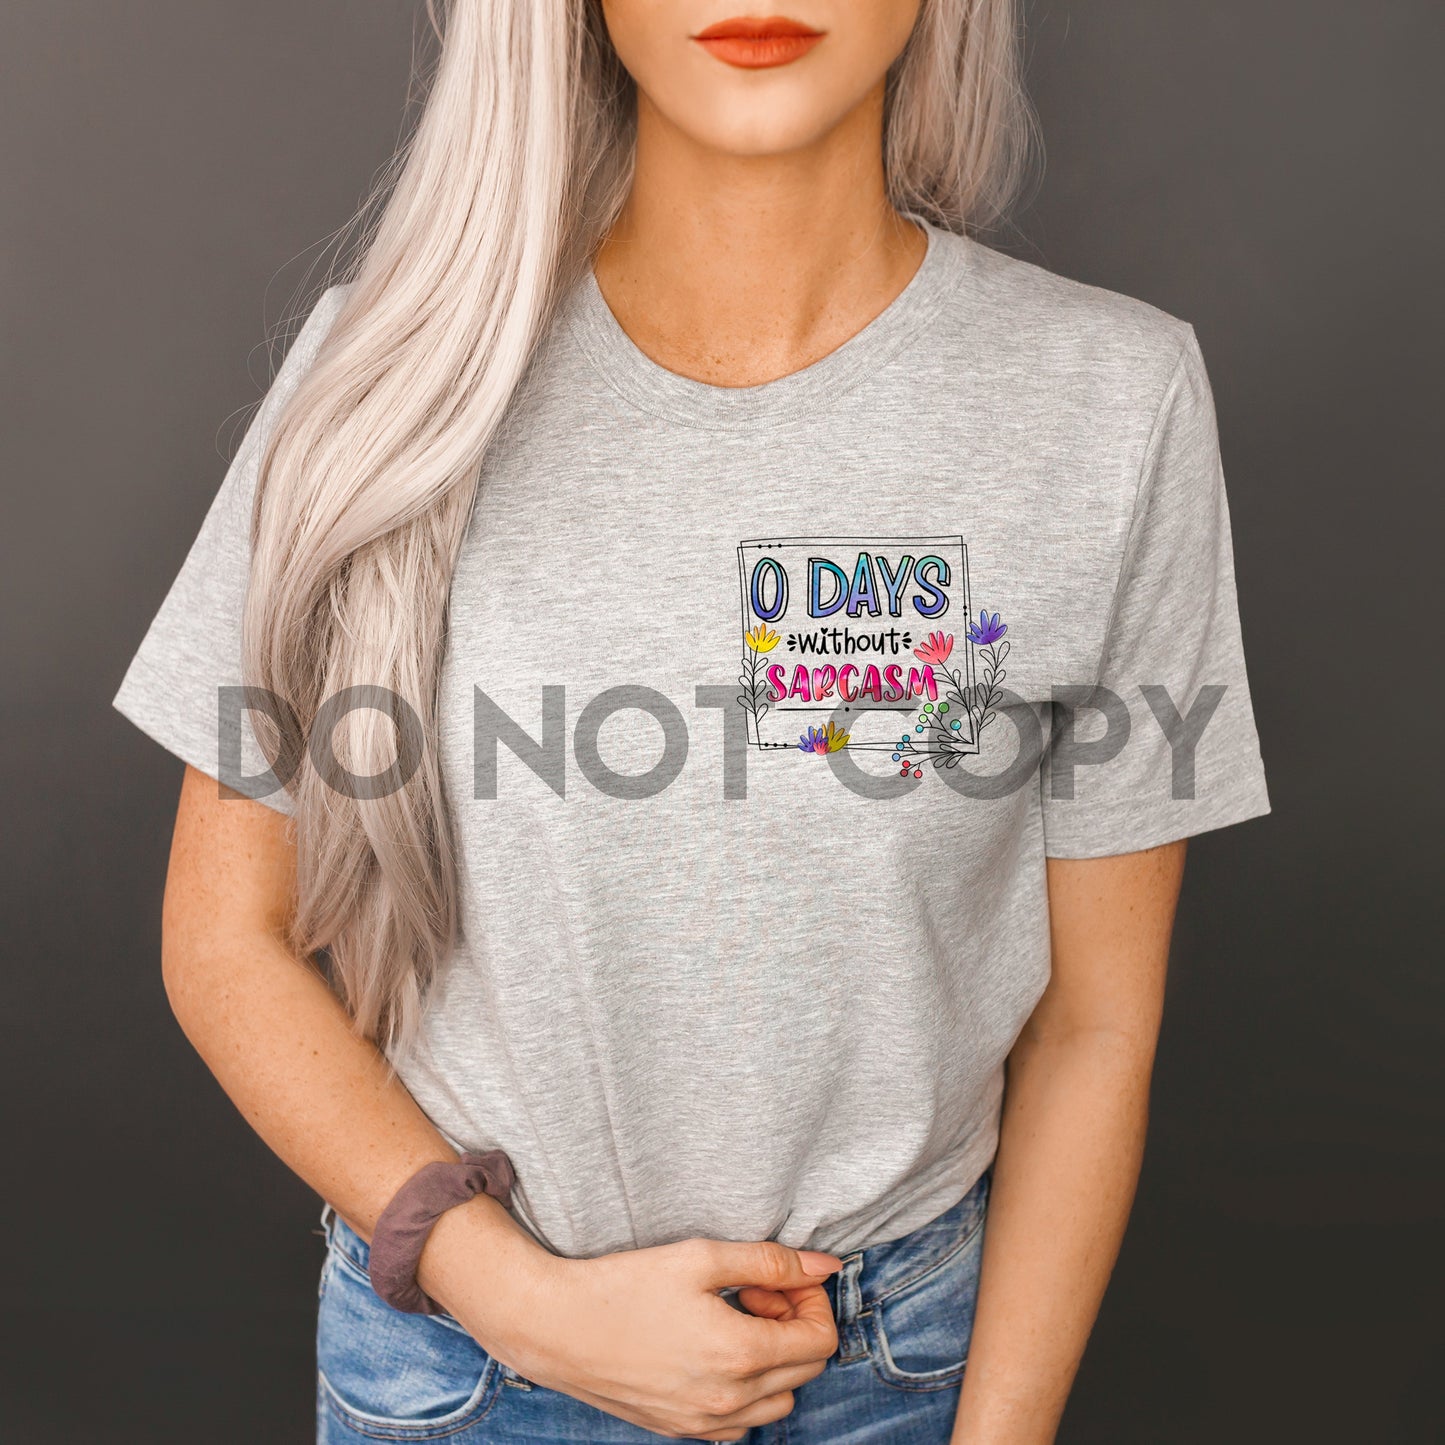 0 Days Without Sarcasm Dream Print or Sublimation Print